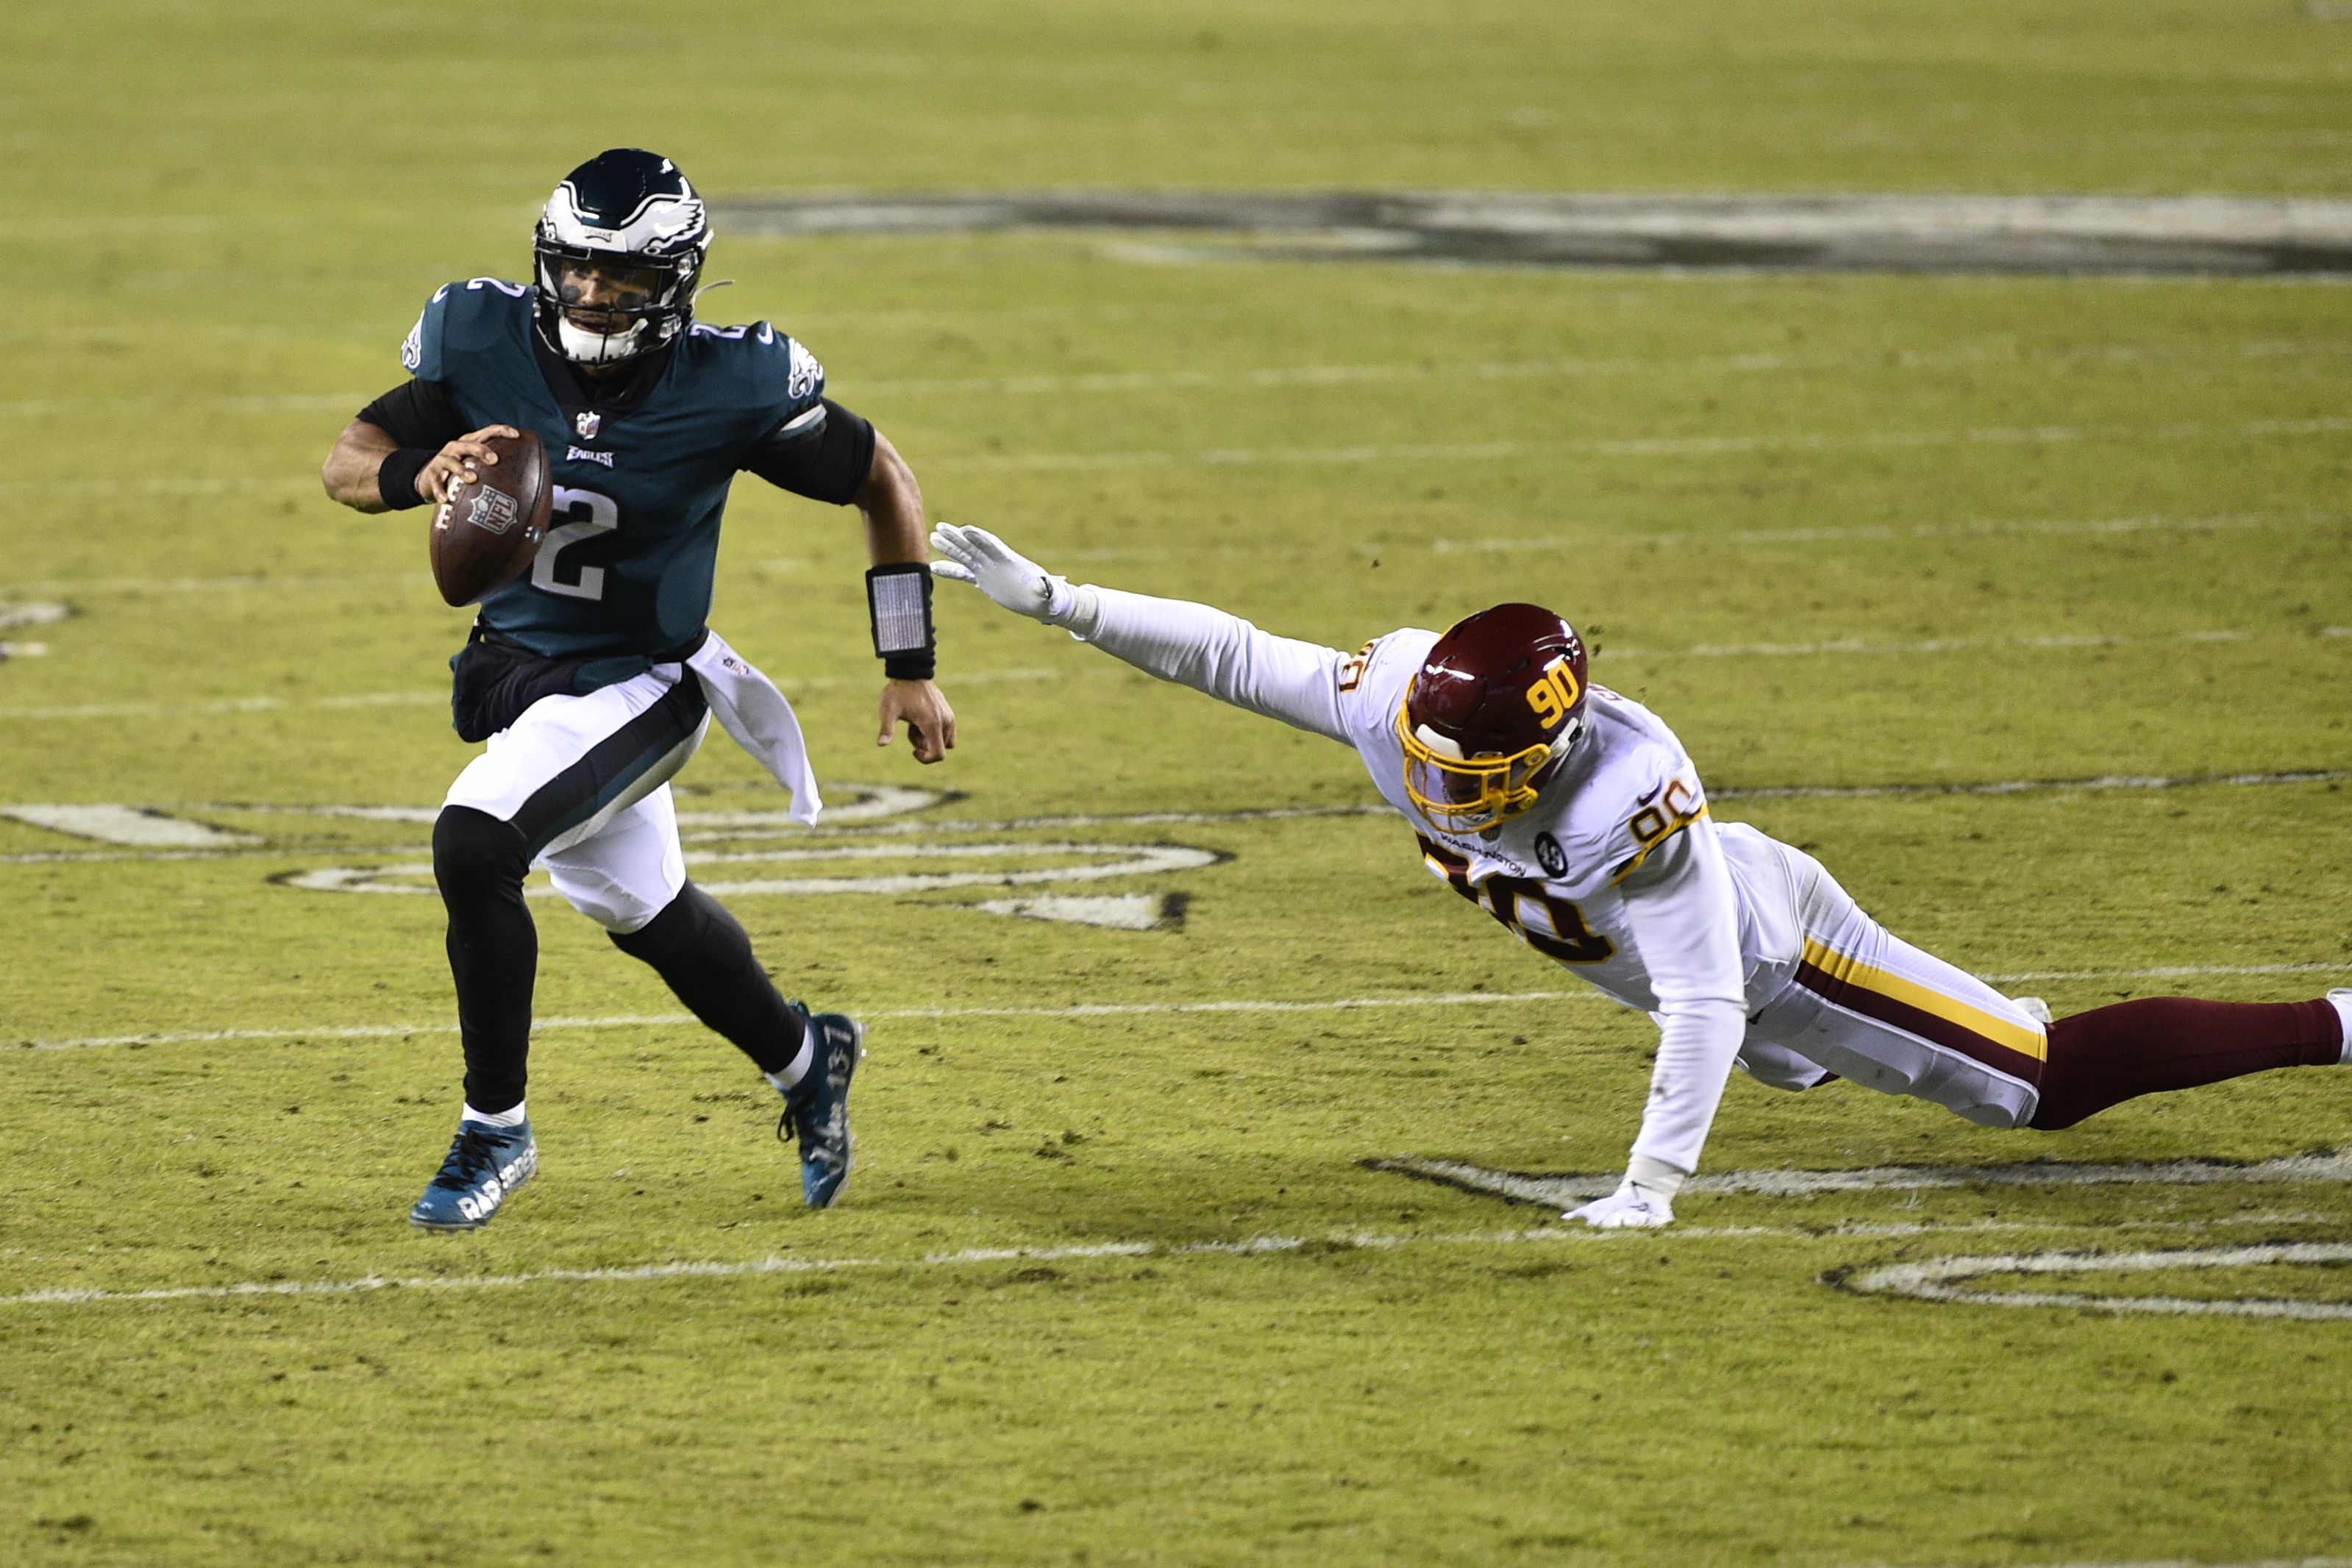 Eagles' Jalen Hurts Unlikely For Week 17